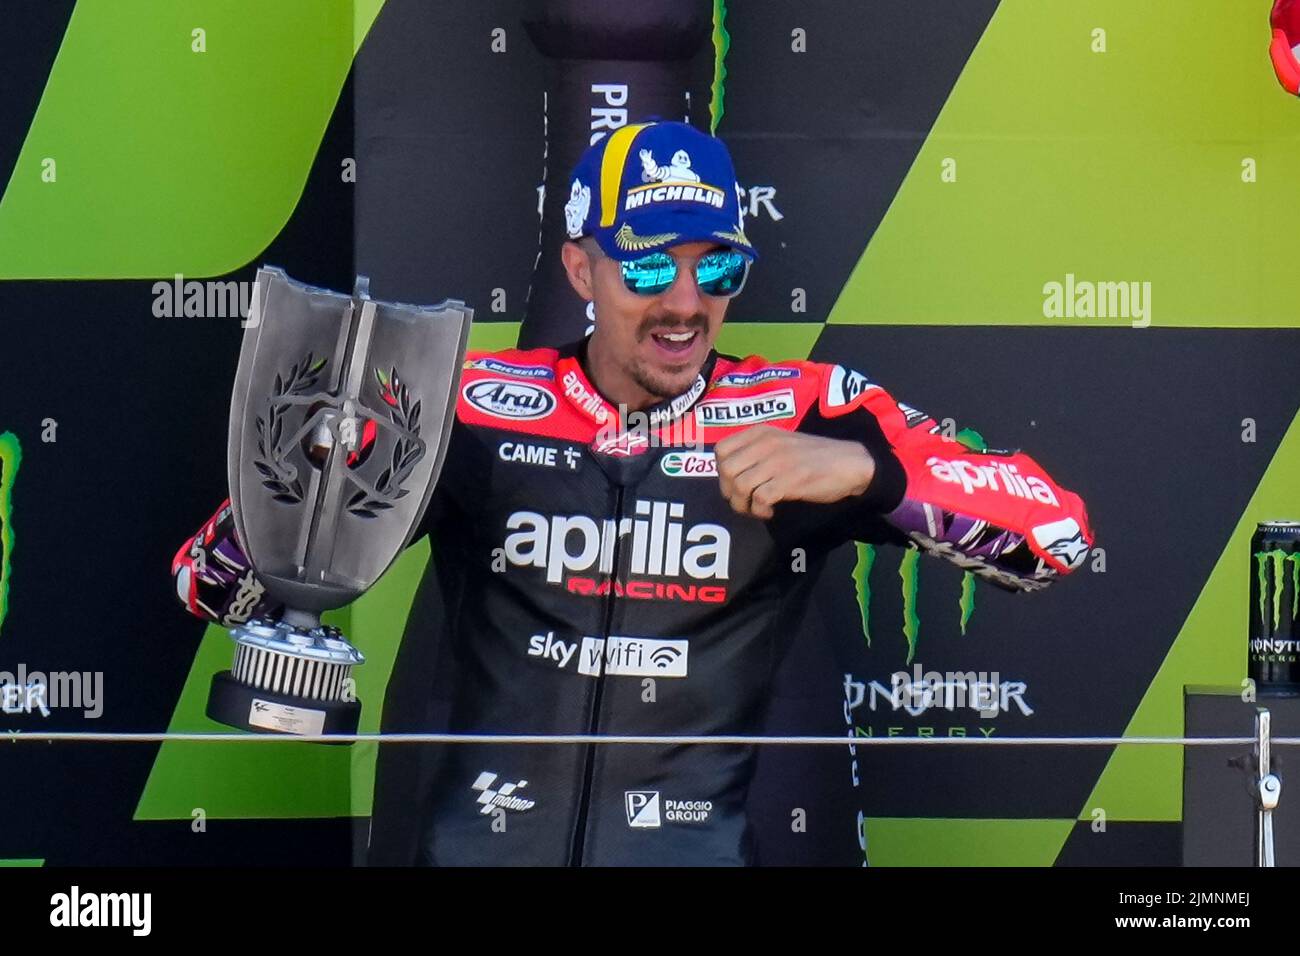 Towcester, UK. 07th Aug, 2022. Maverick VINALES (Spain) of the Aprilia Racing Team celebrates on the podium after finishing second in the 2022 Monster Energy Grand Prix Race at Silverstone Circuit, Towcester, England on the 7th August 2022. Photo by David Horn. Credit: PRiME Media Images/Alamy Live News Stock Photo